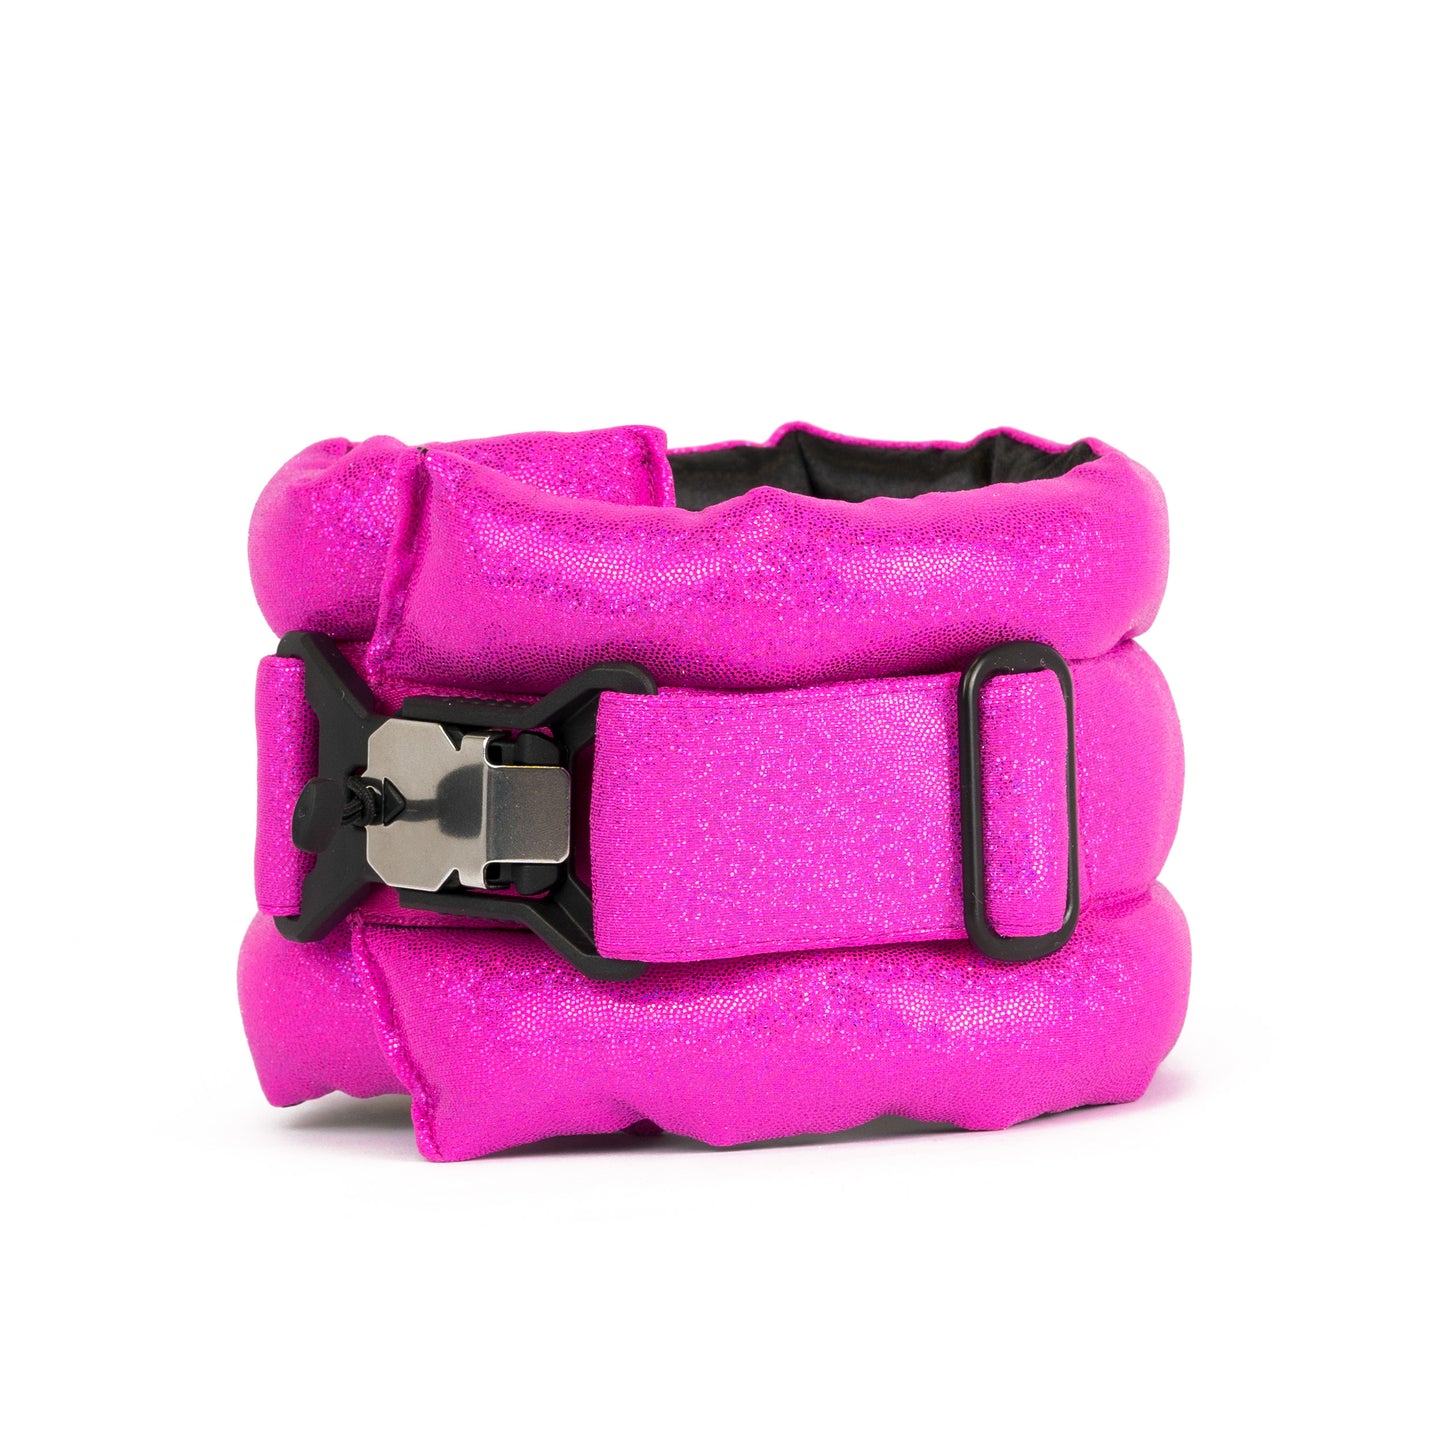 Standard Fluffy Magnetic Collar Holographic Neon Fuchsia with Black